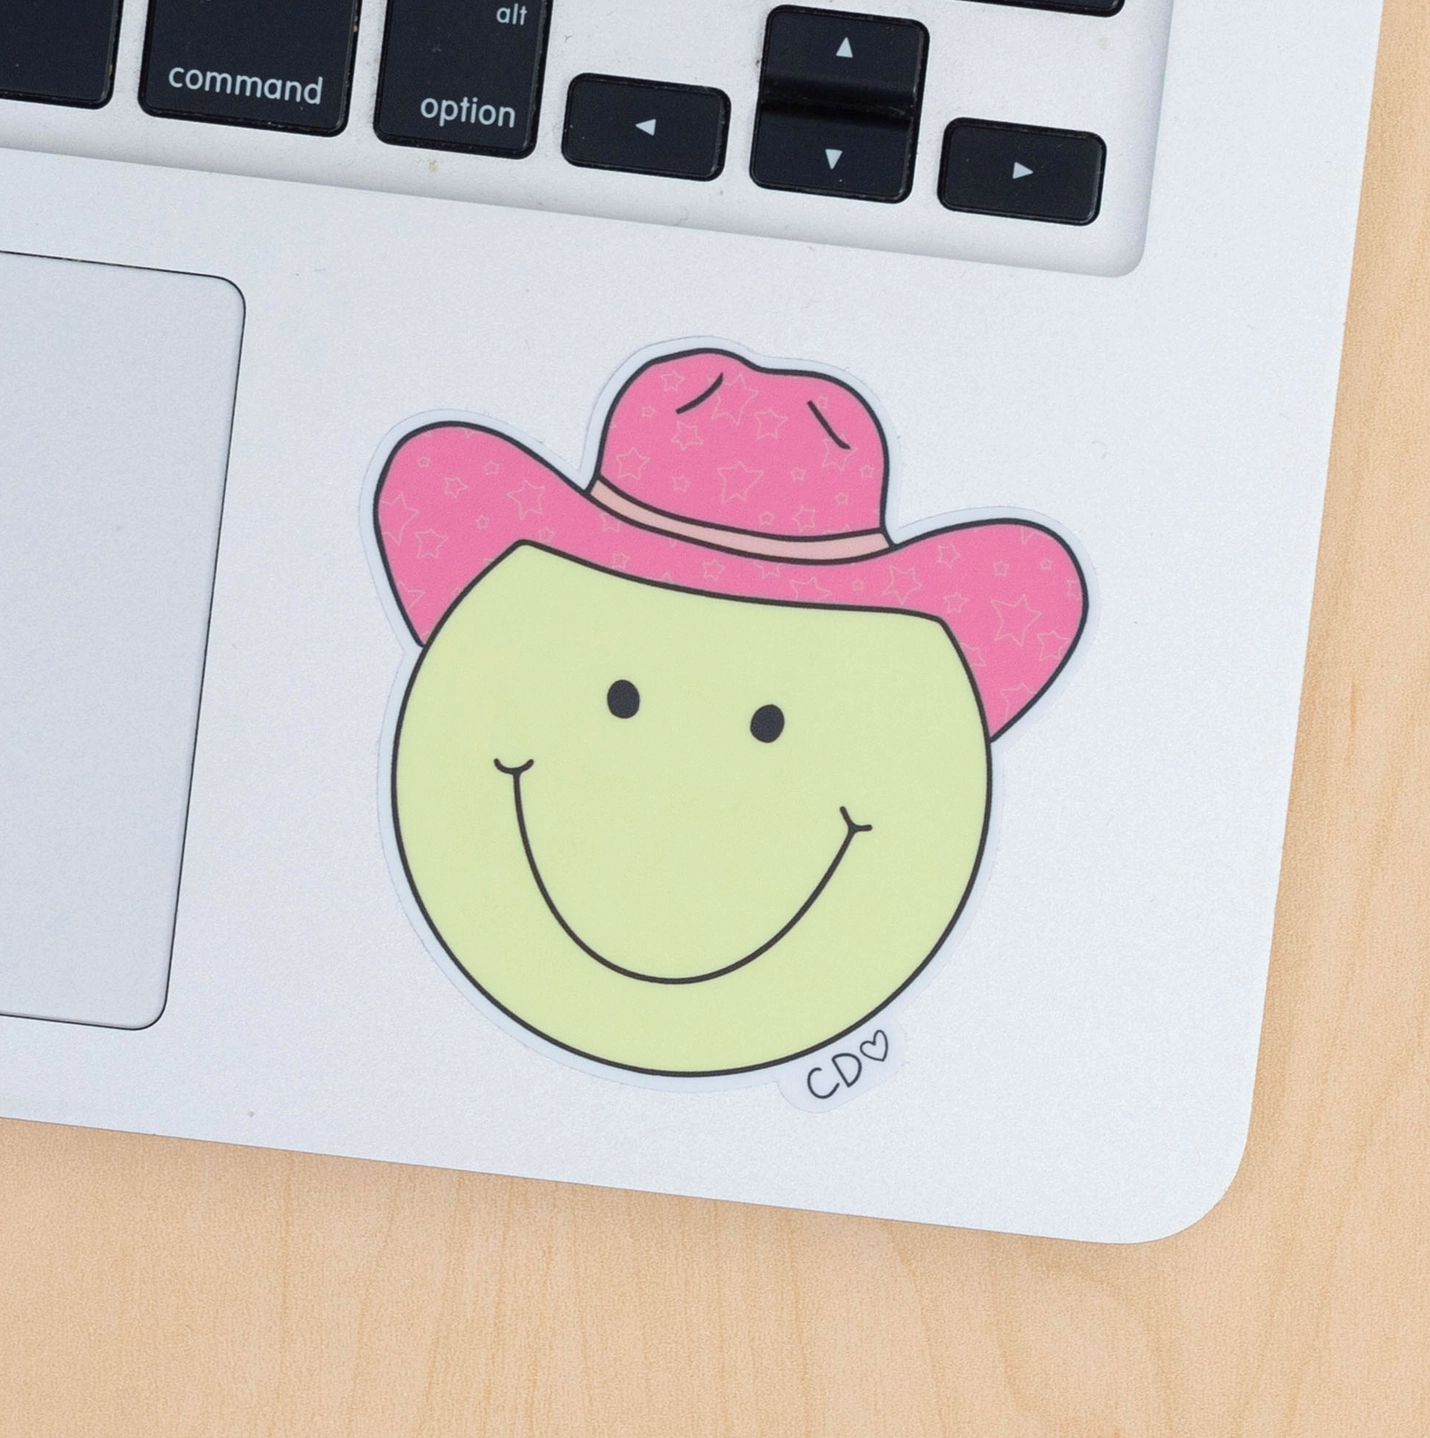 Smiley Cowgirl Decal Sticker